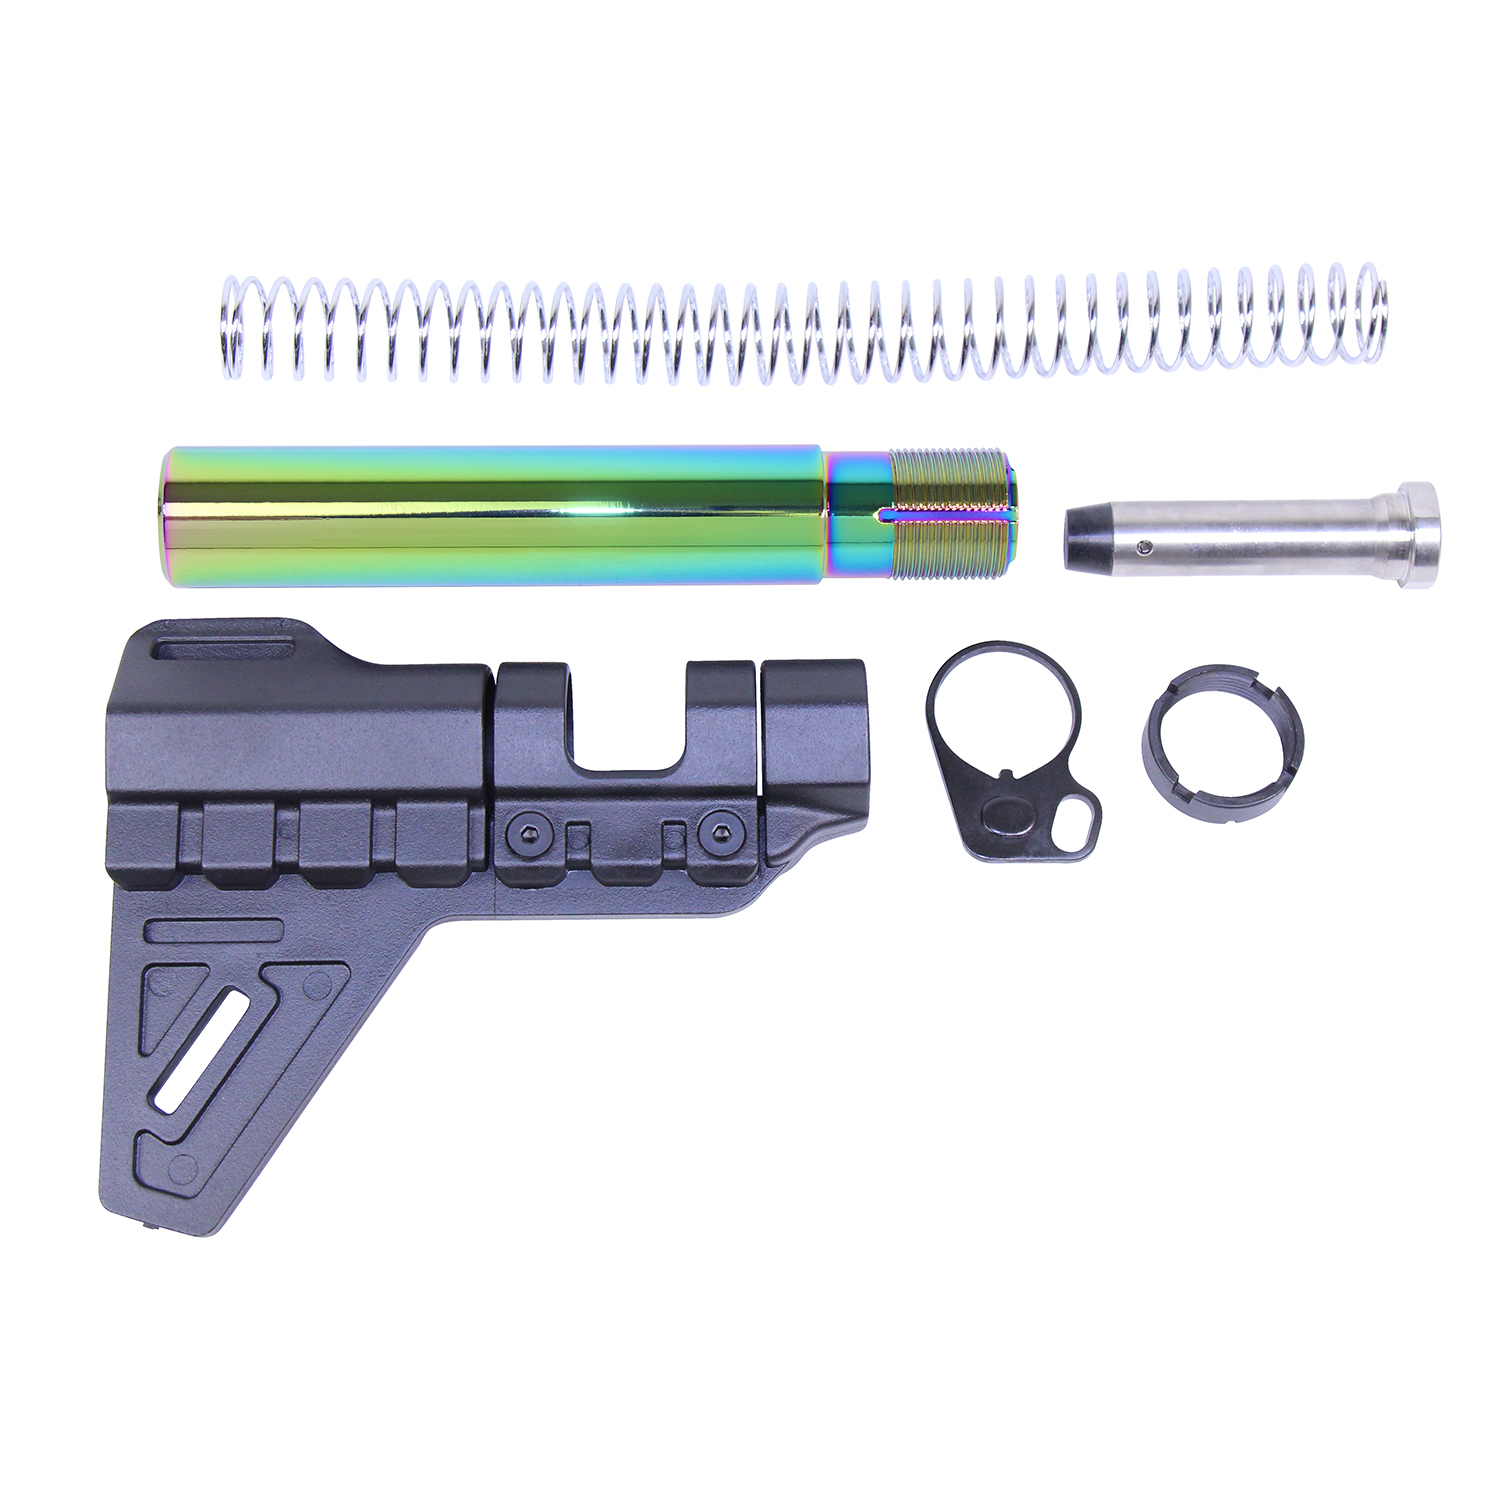 Disassembled AR-15 Micro Breach Pistol with Rainbow RPVD Finish.